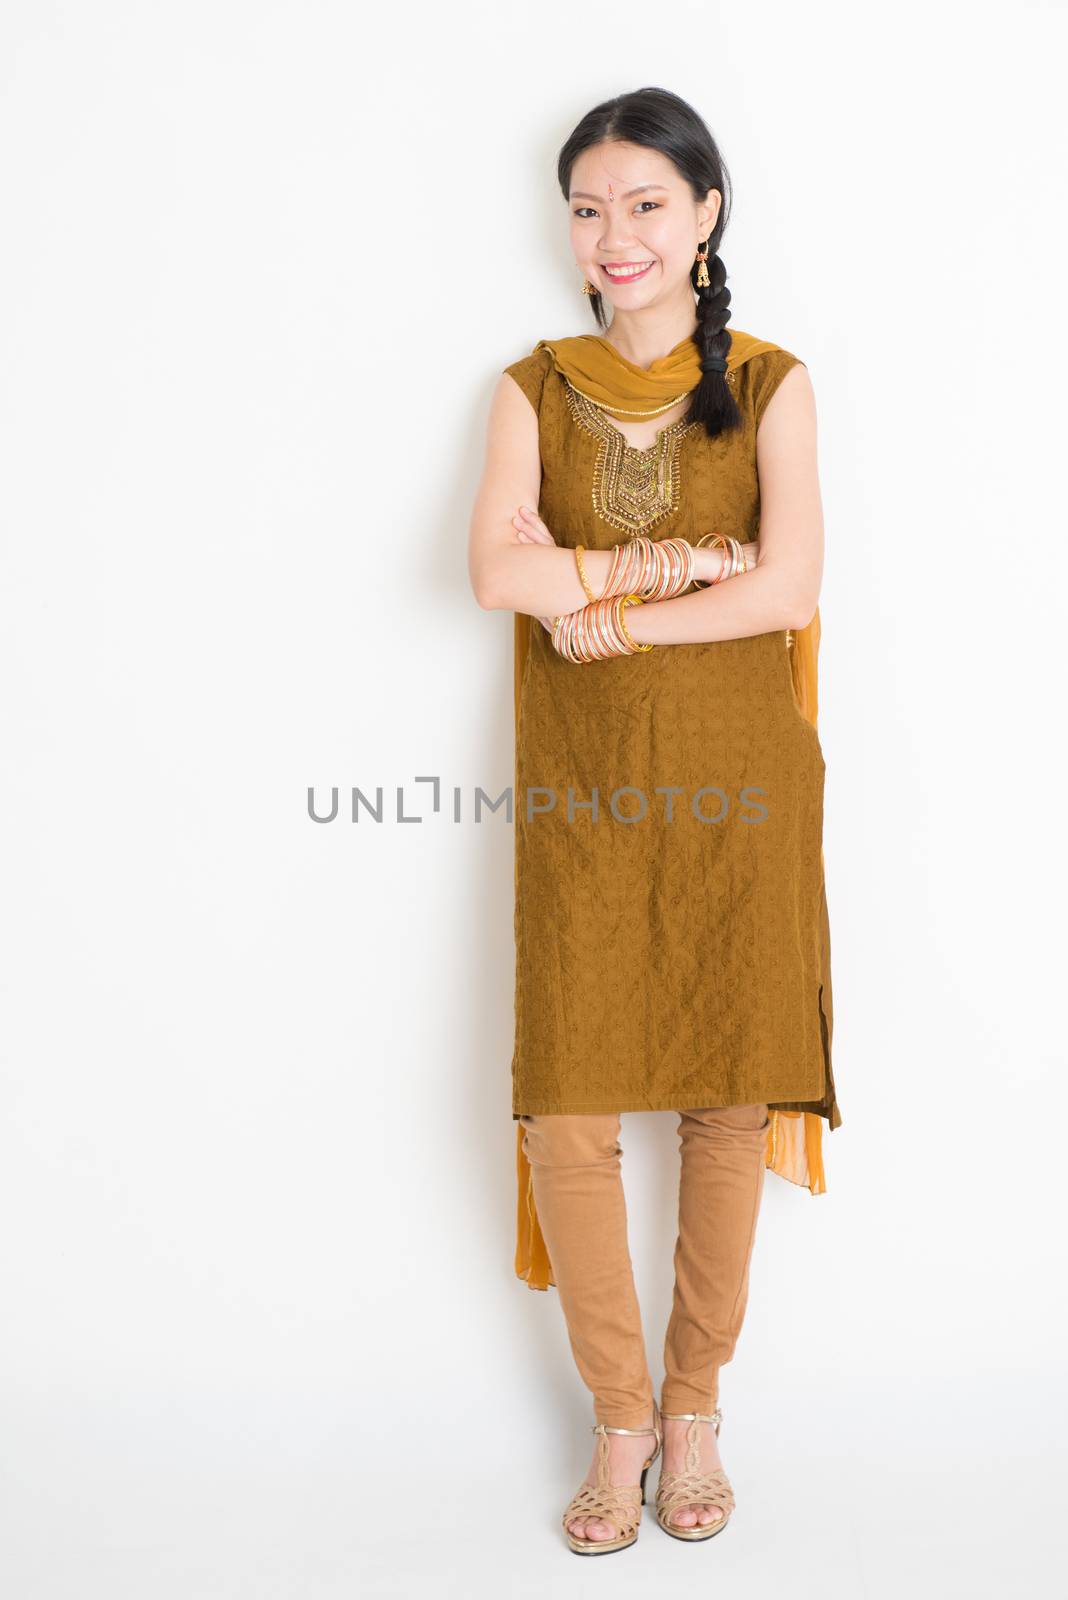 Portrait of young mixed race Indian Chinese female in traditional punjabi dress smiling, full length standing on plain white background.